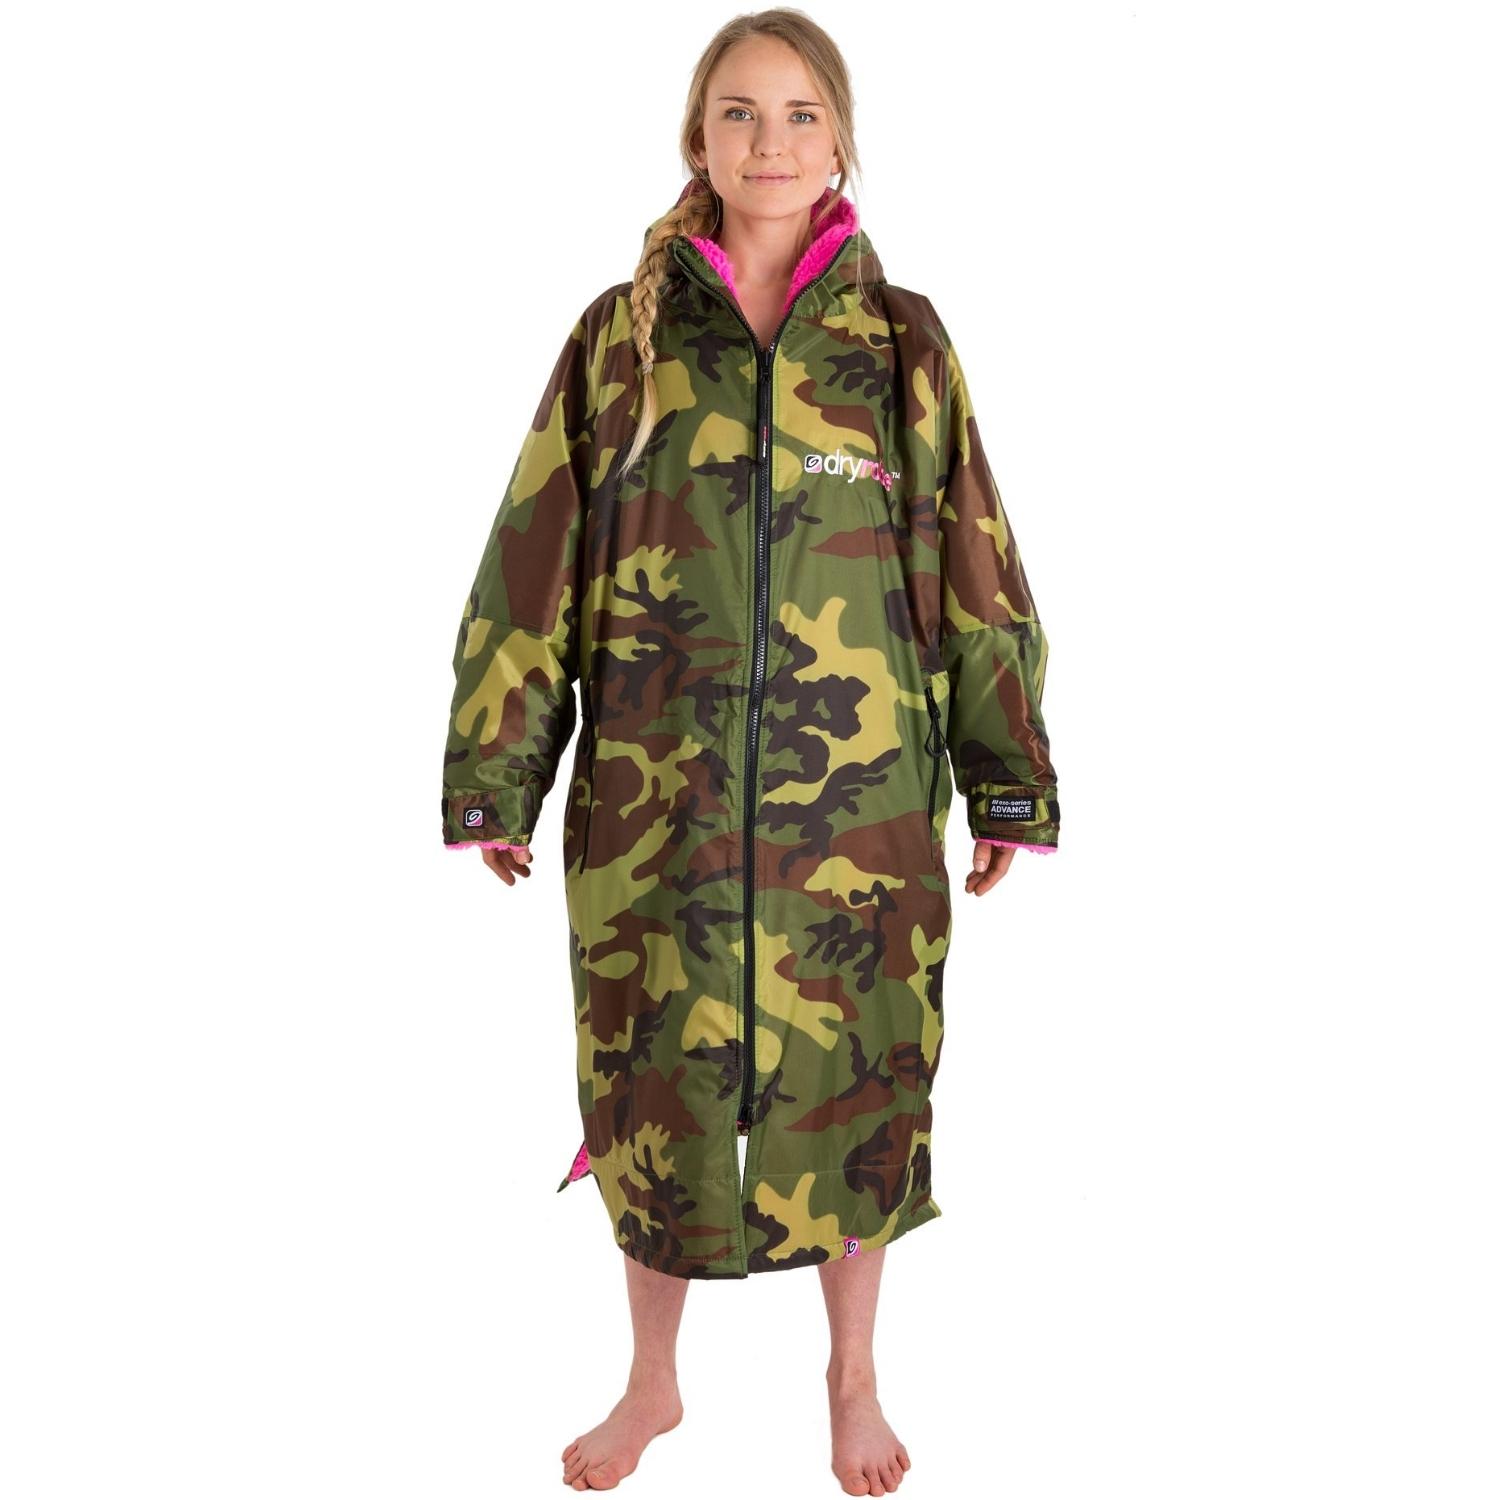 Dryrobe Advance Long Sleeve Drying & Changing Robe - Camouflage/Pink - Changing Robe Poncho Towel by Dryrobe